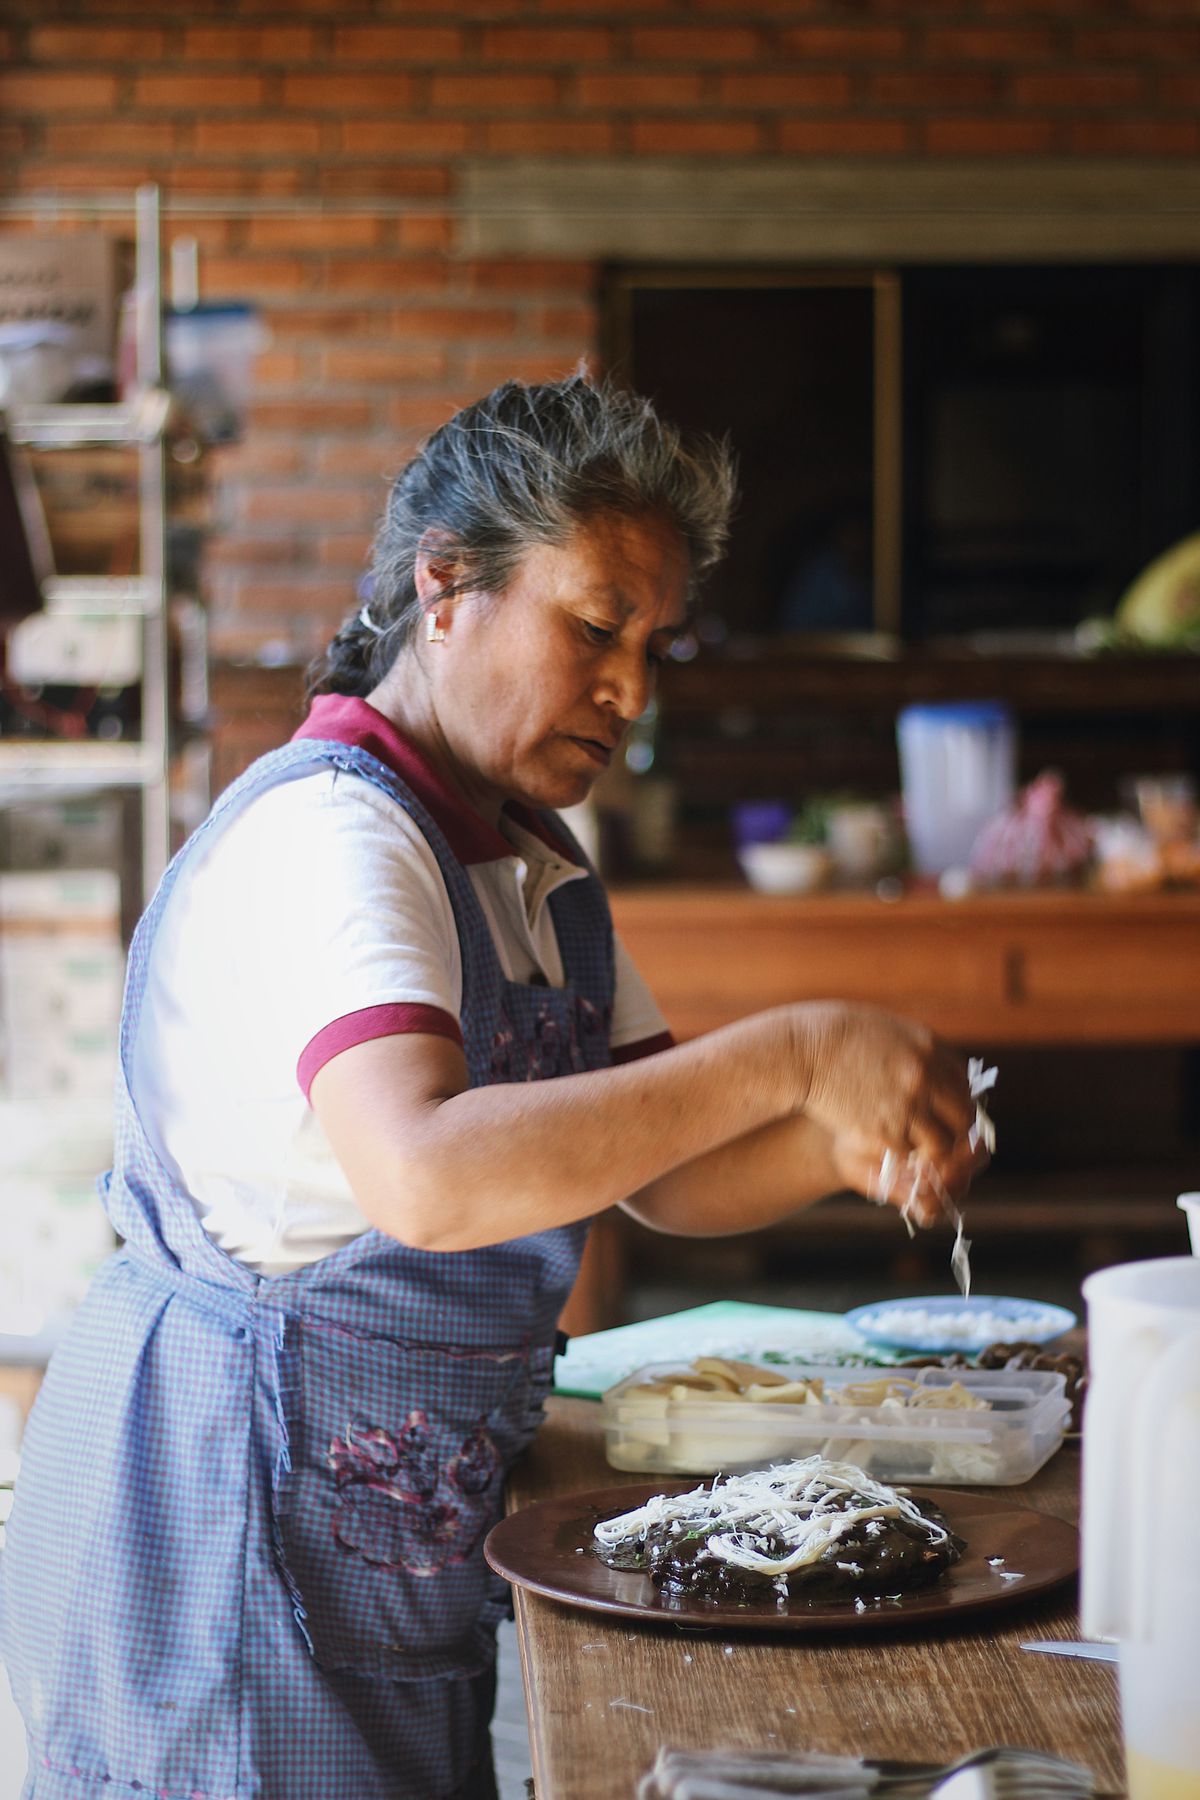 Woman in an apron sprinkles shredded cheese atop a dish containing mole negro.